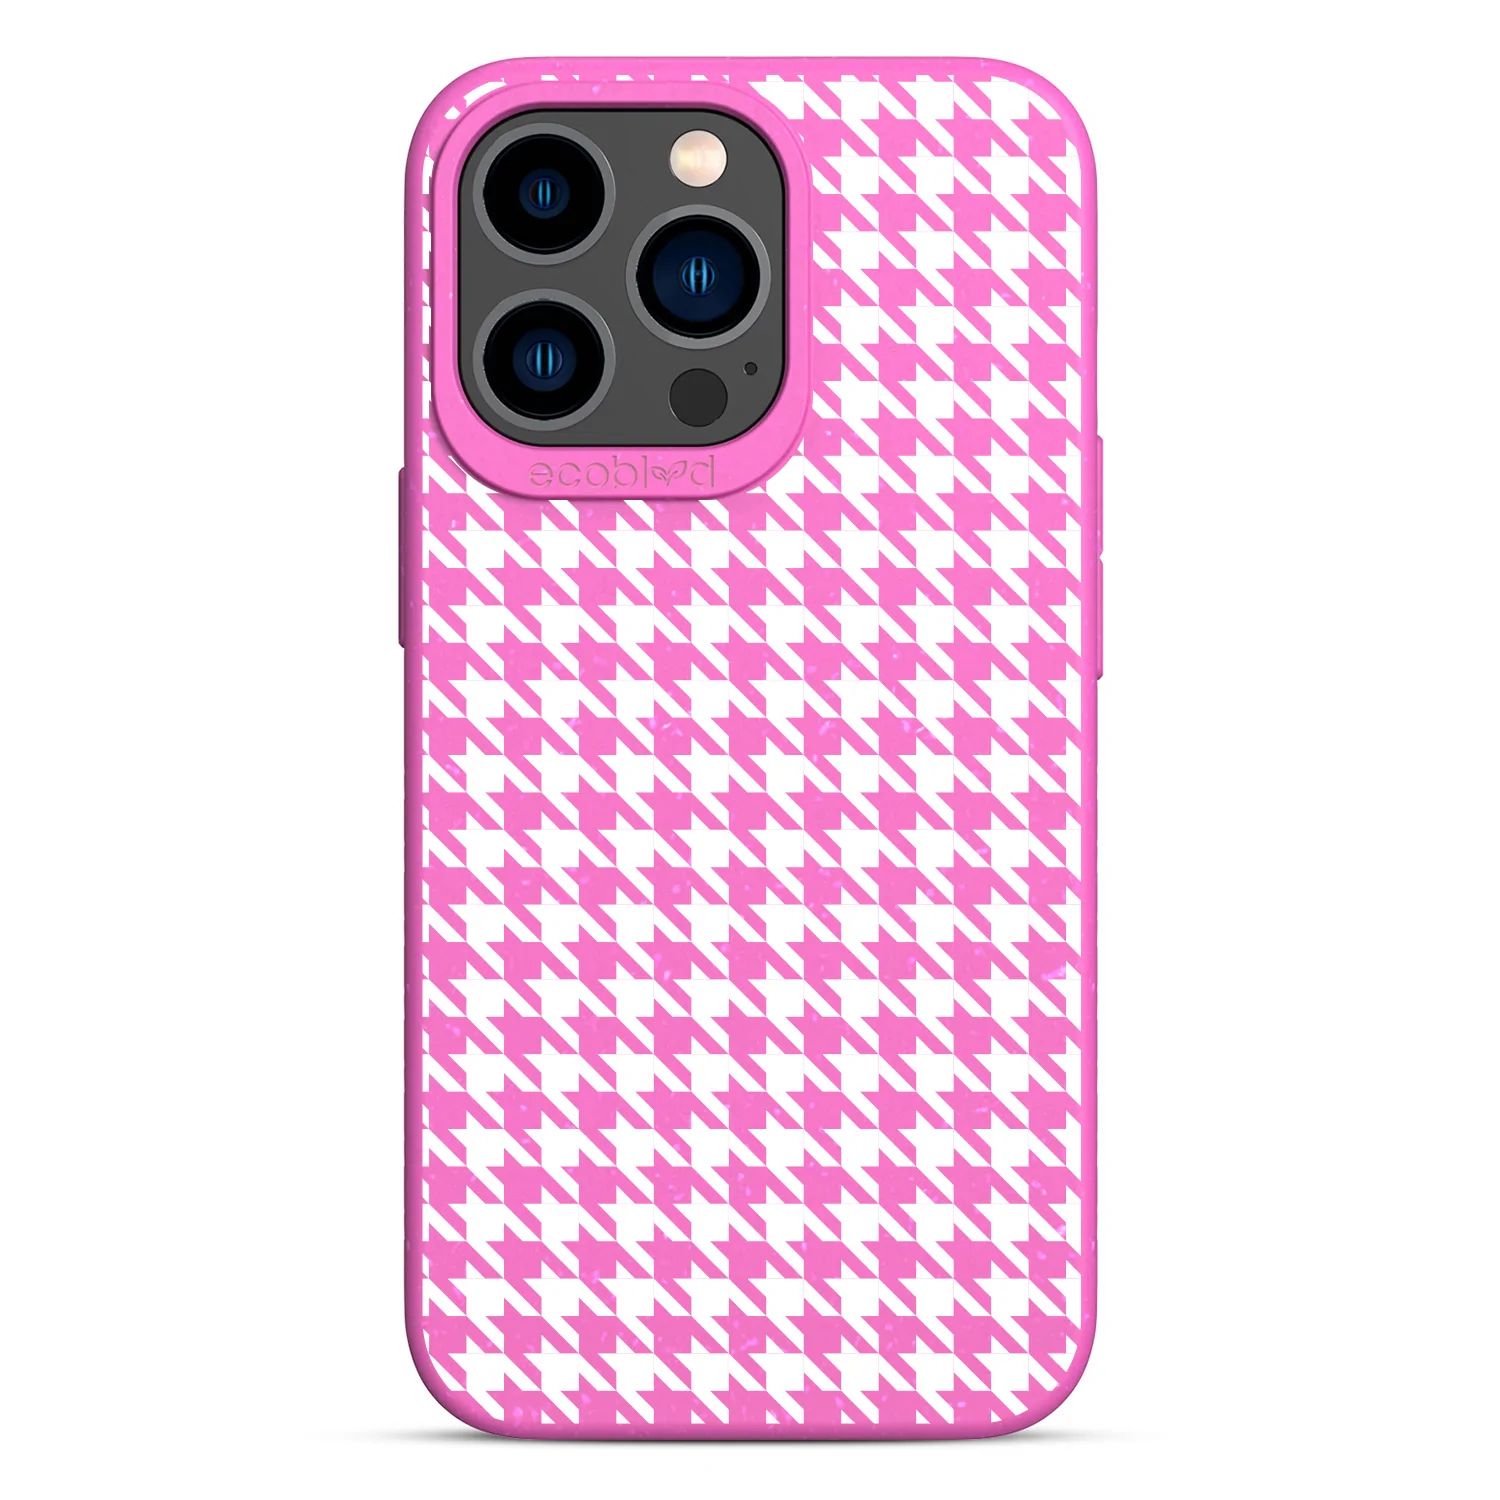 Houndstooth - iPhone 12 & 13 Pro Max Solid Case | EcoBlvd | EcoBlvd